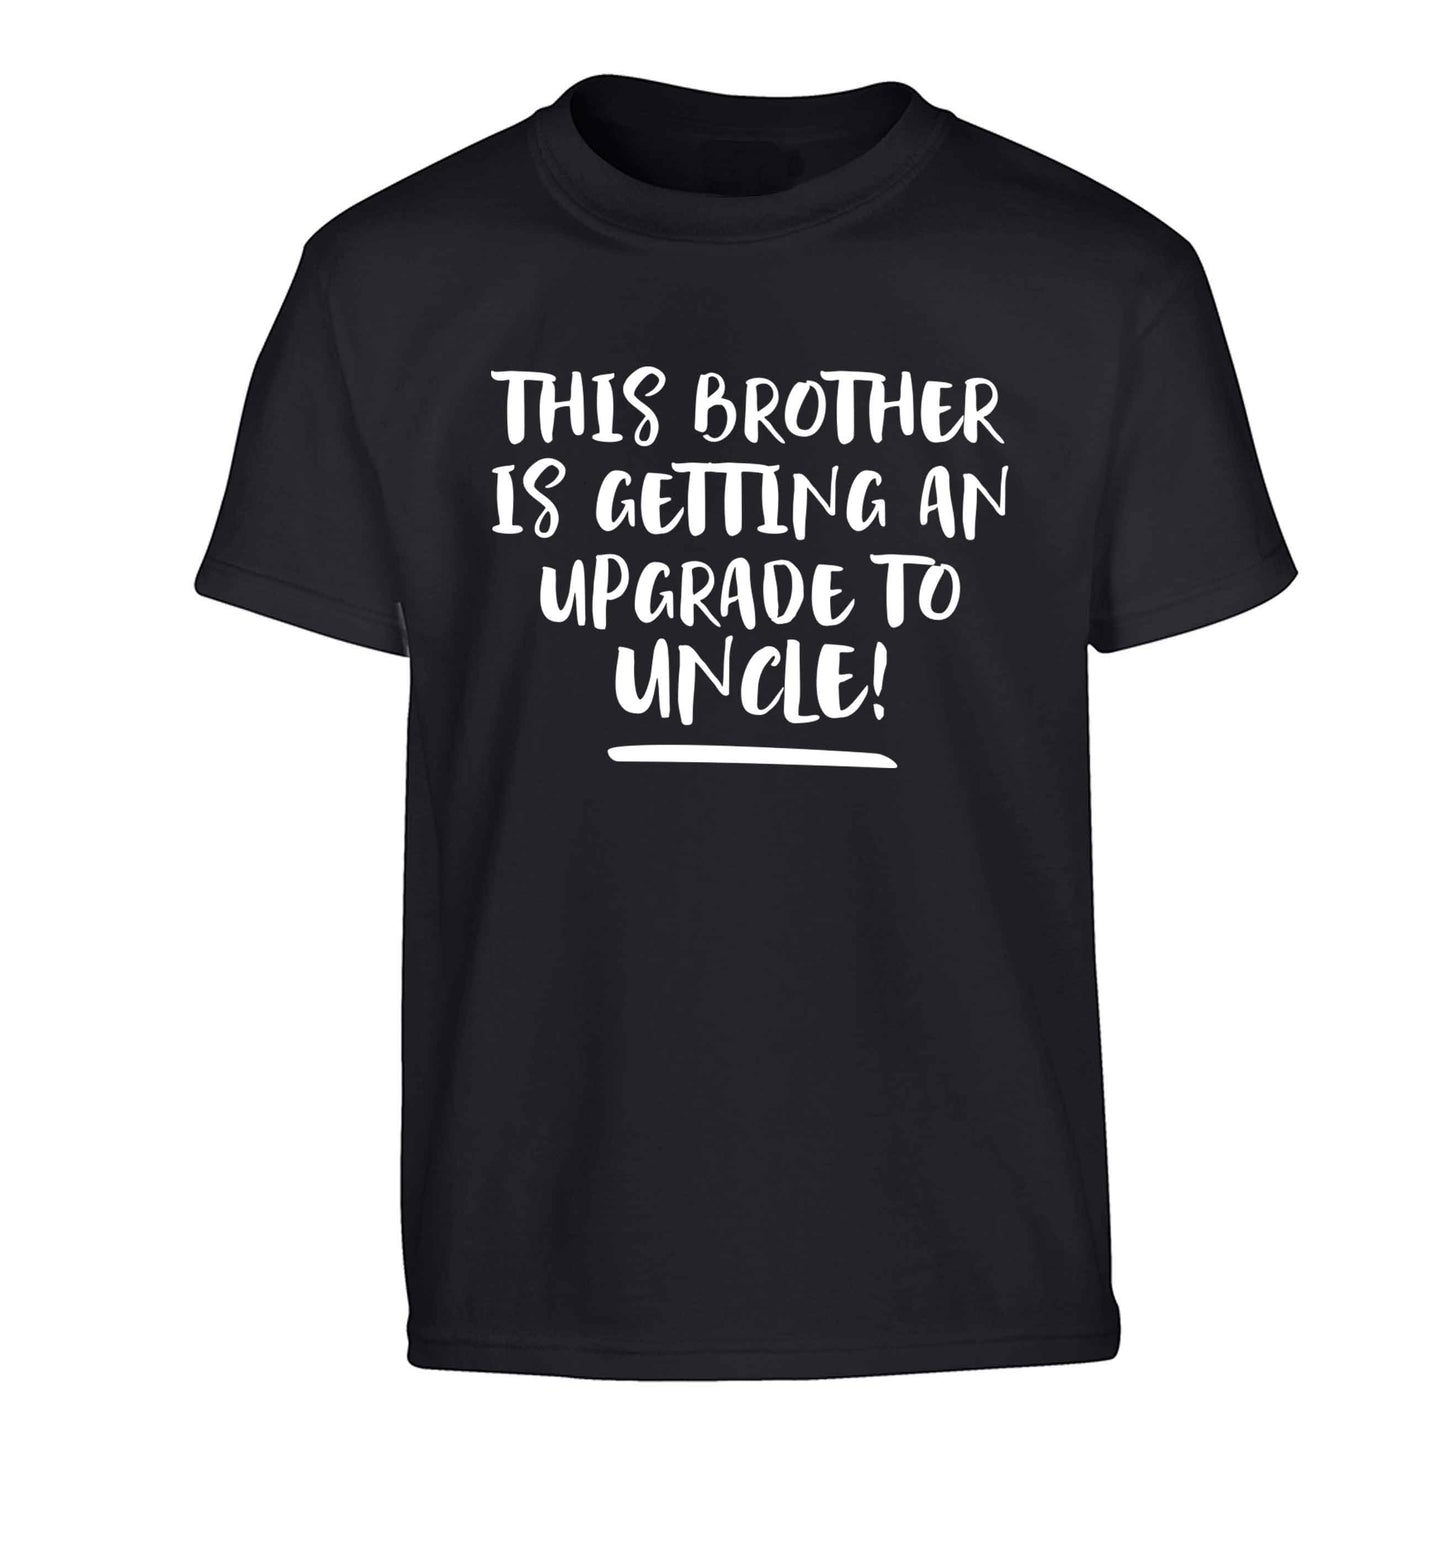 This brother is getting an upgrade to uncle! Children's black Tshirt 12-13 Years